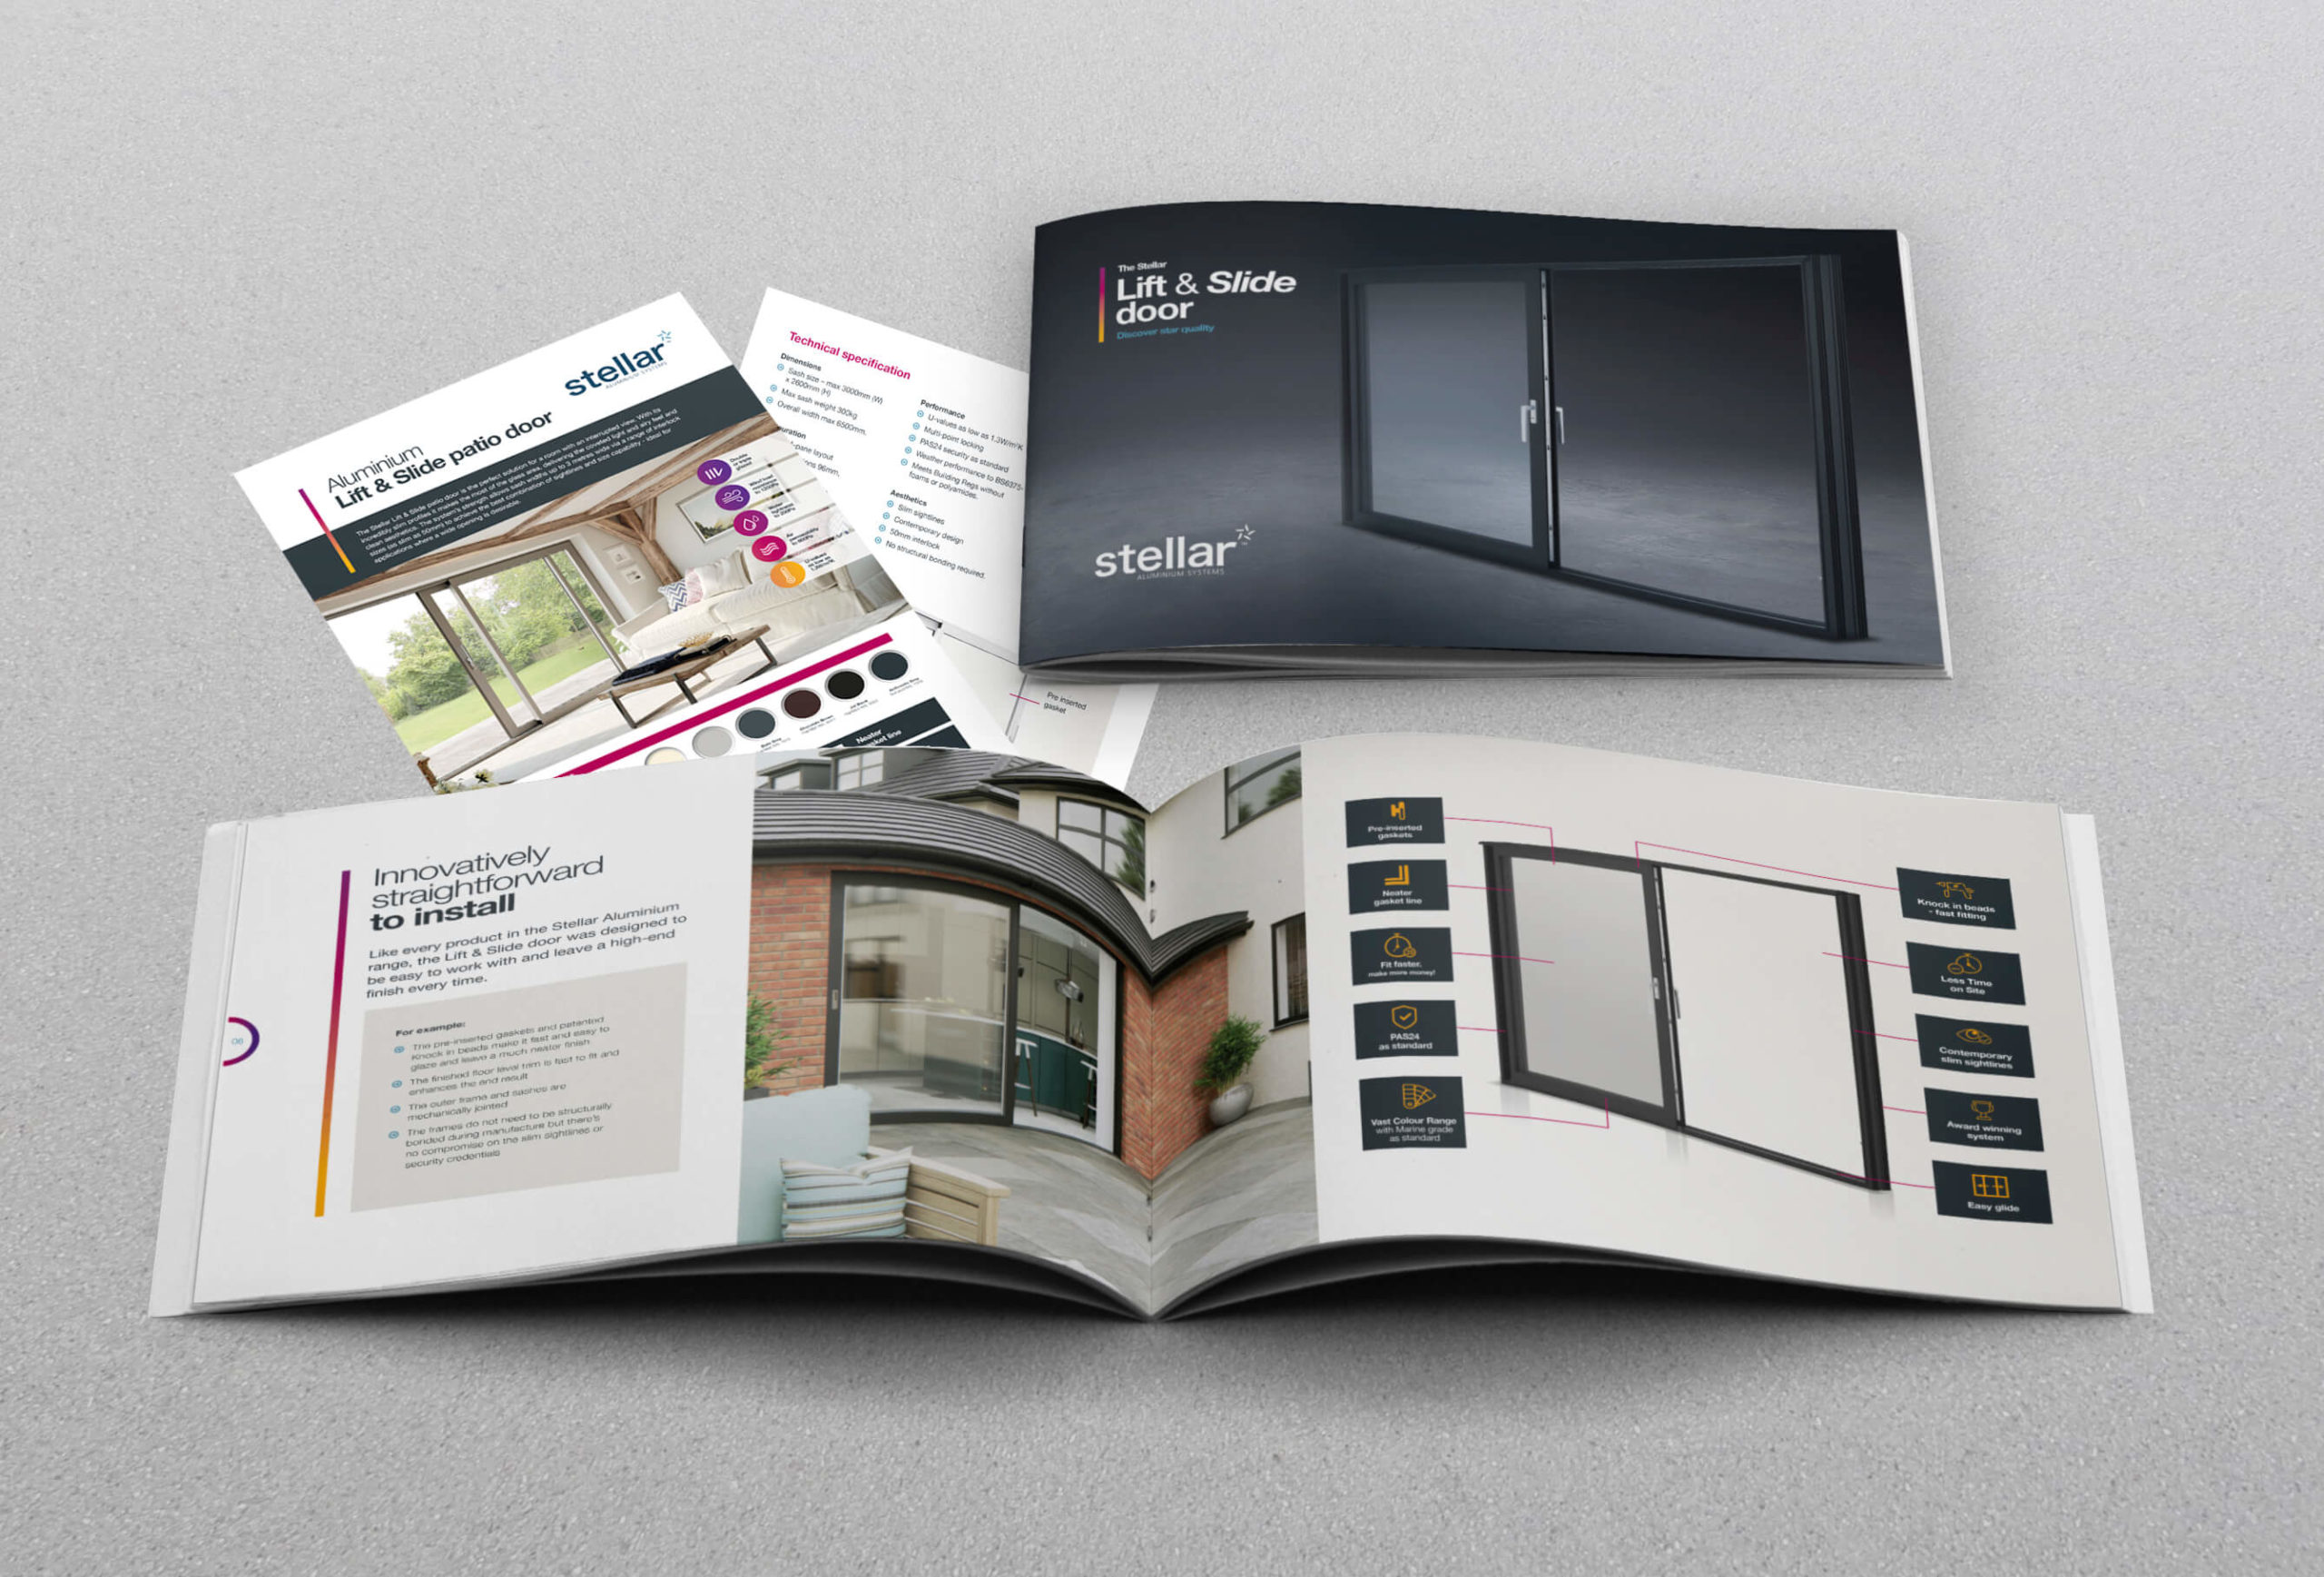 Epwin Window Systems launches literature for the Stellar Lift & Slide Door